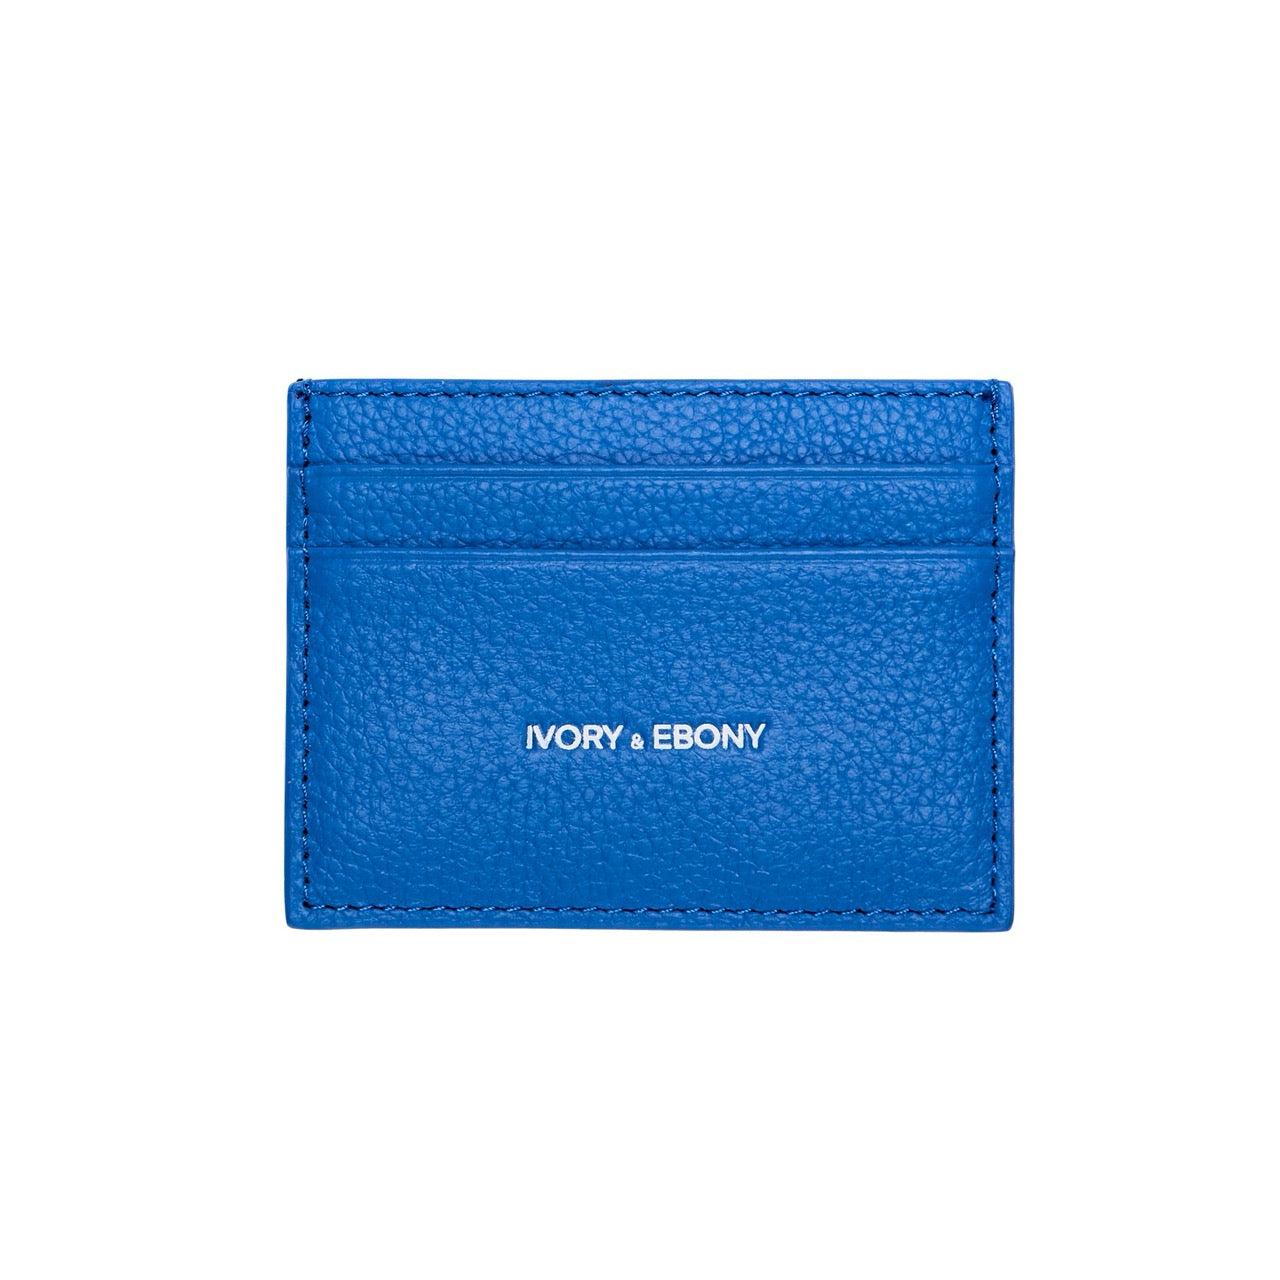 Bold in Blue, Strong in Security: Ivory & Ebony Wallet - Crafted from 100% Genuine Leather, RFID Blocking - Make a Statement with Uncompromised Style and Safety